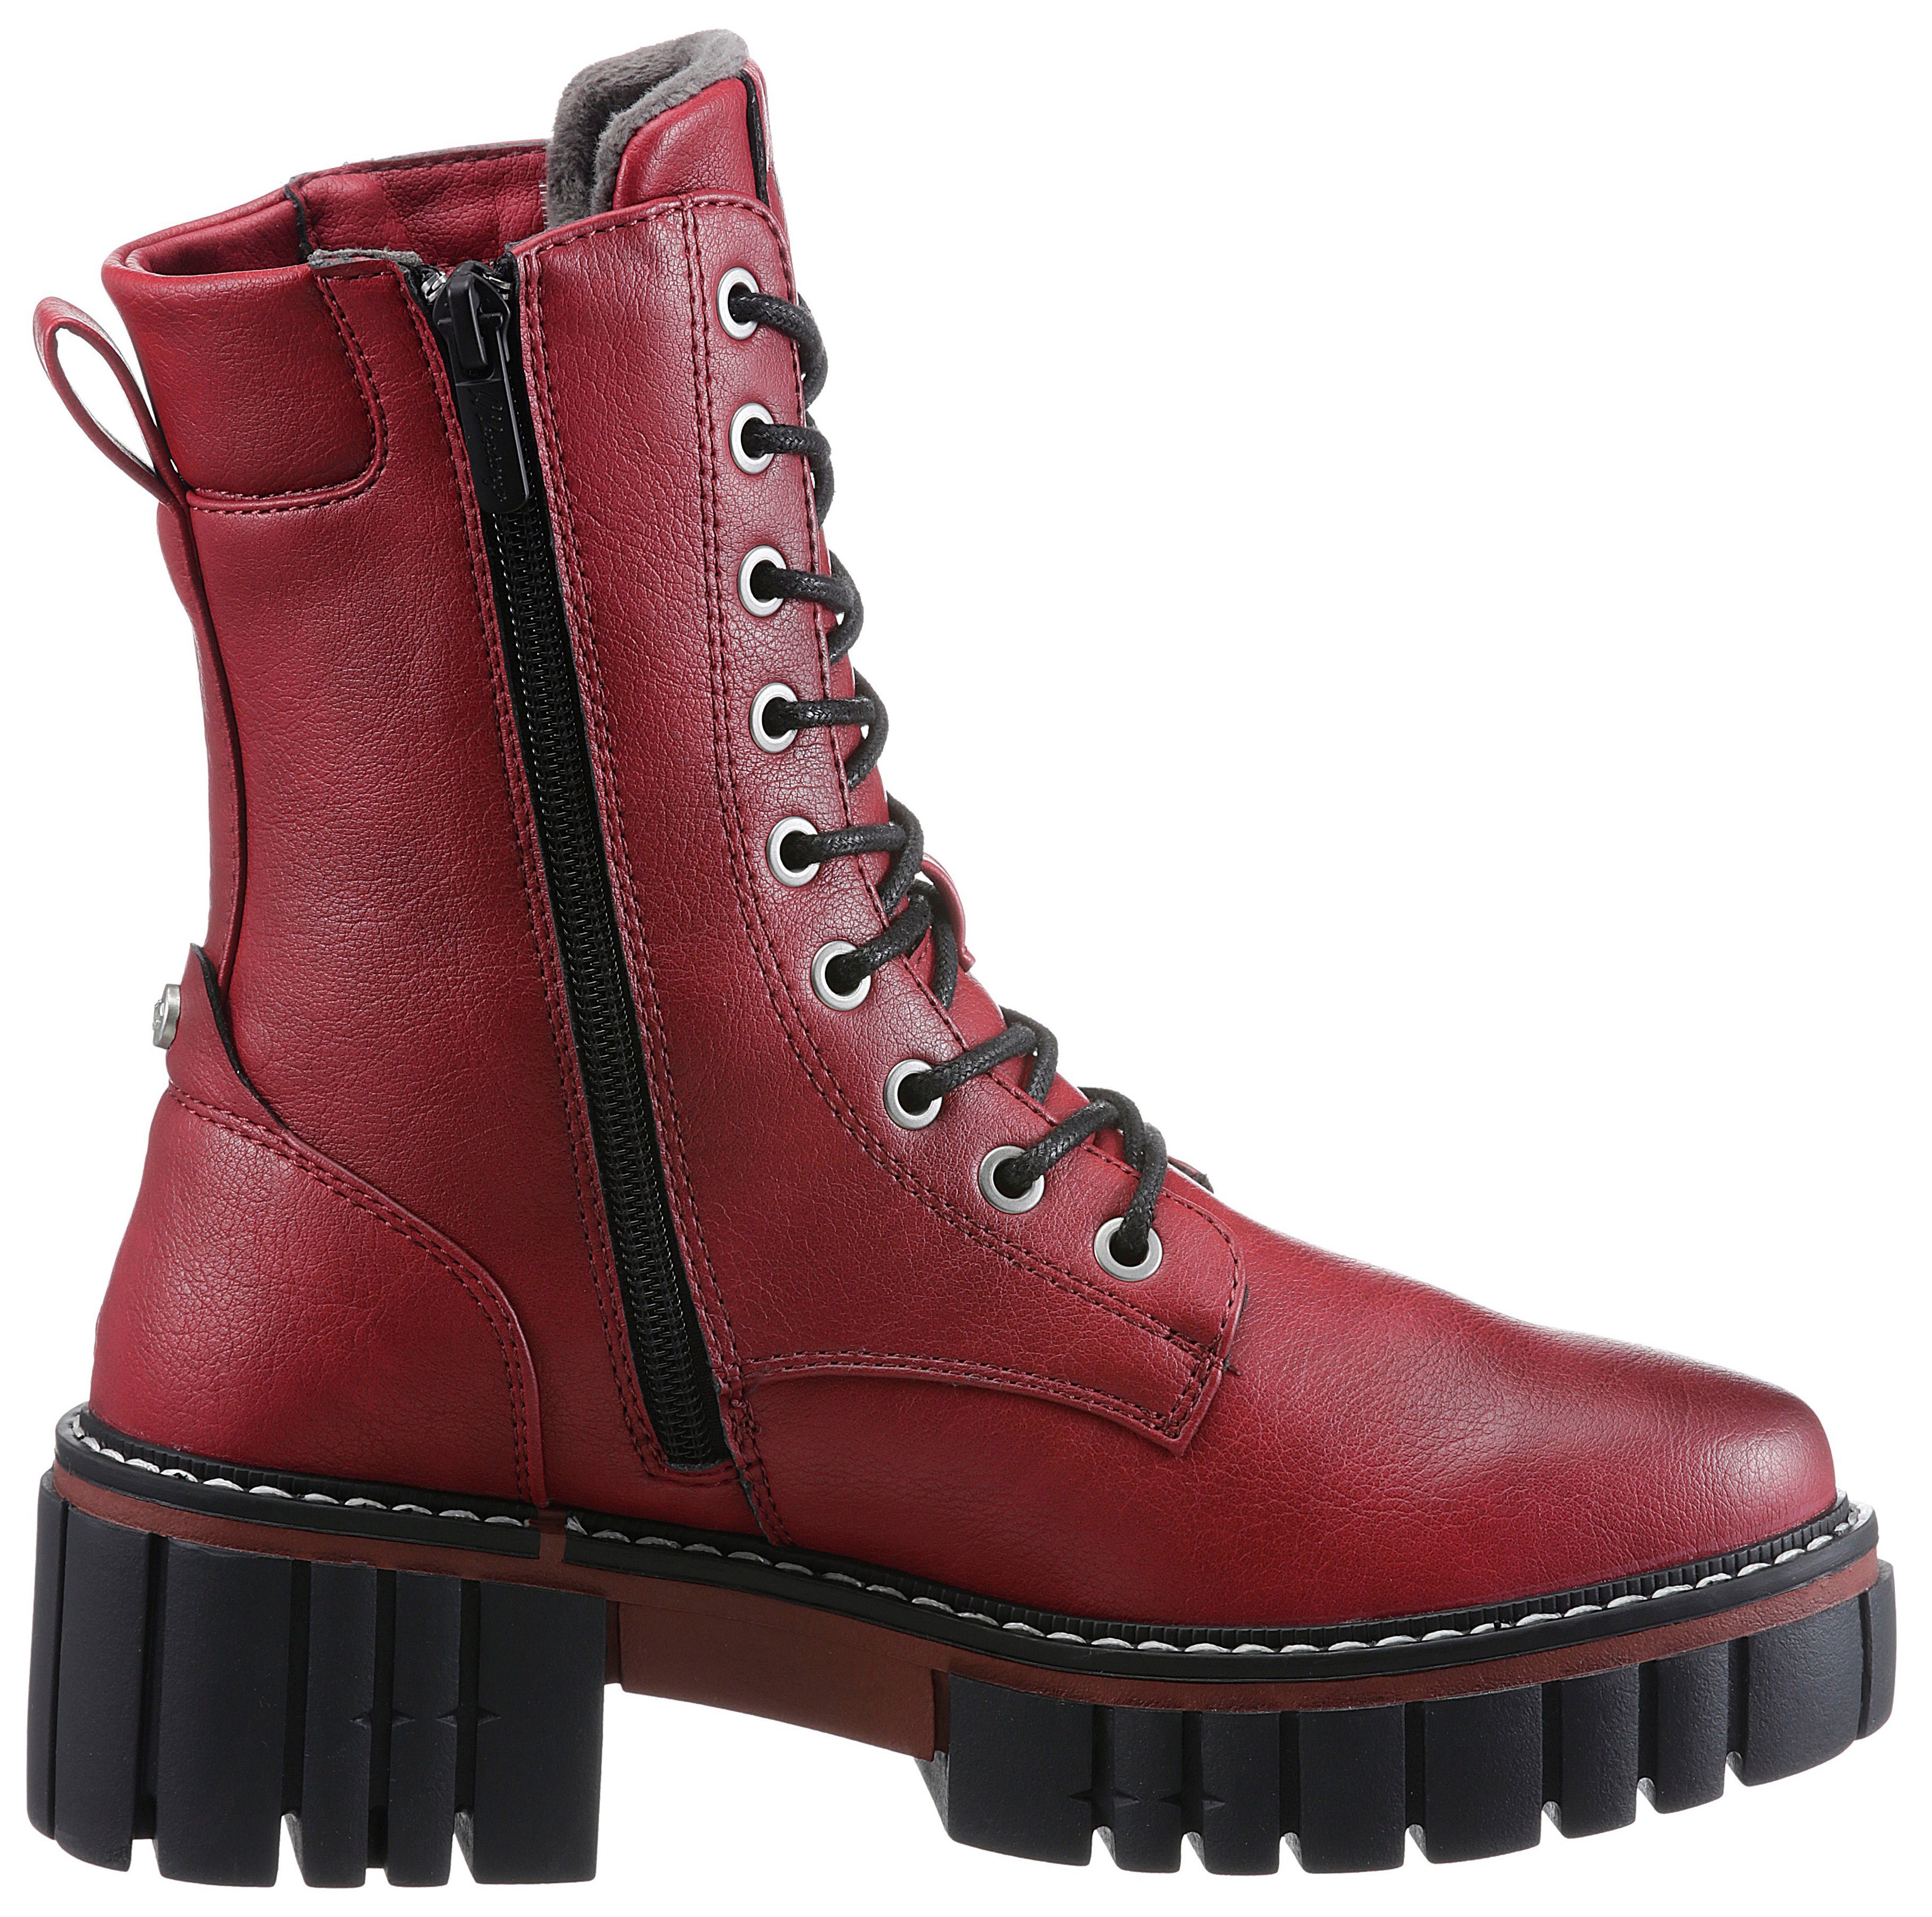 Mustang Shoes Schnürboots mit Profilsohle rot